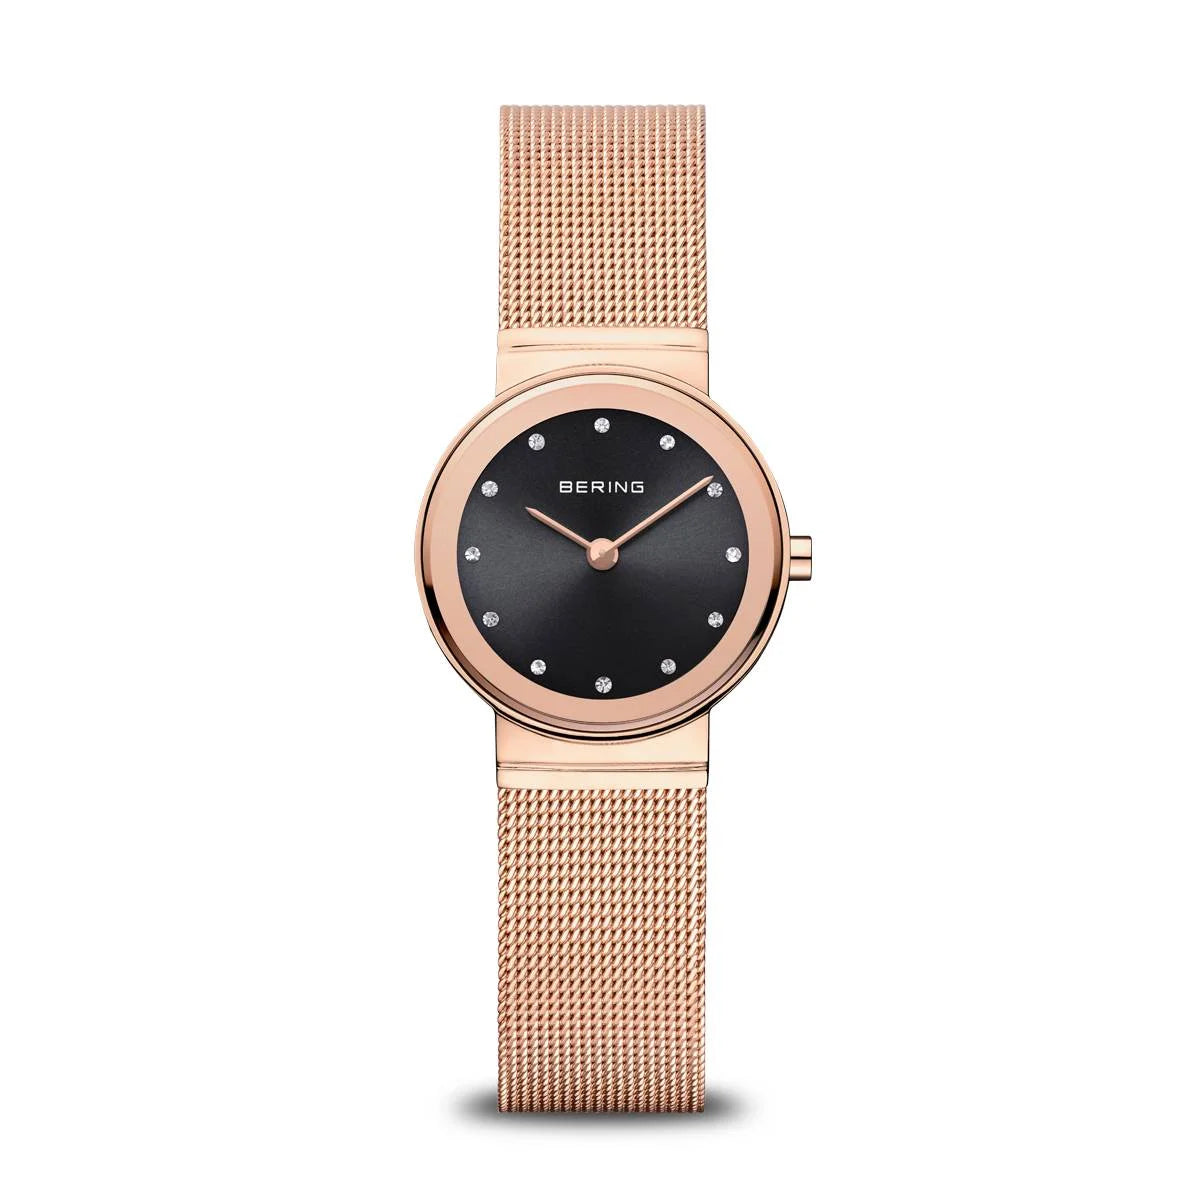 Bering ladies watch in rose gold with black dial